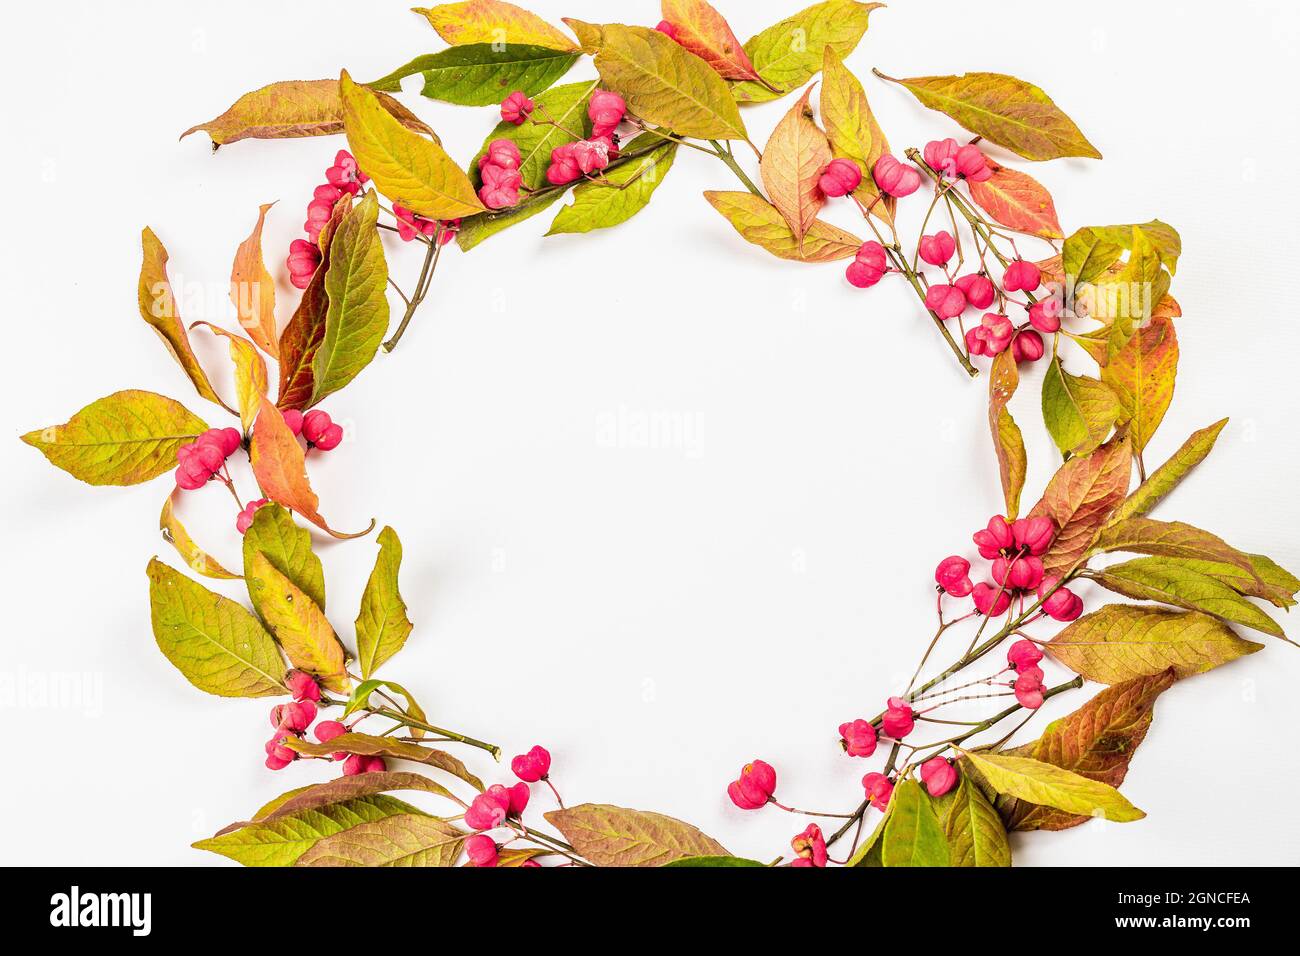 Wreath from Euonymus europaeus isolated on a white background. Autumn frame decorative composition with toxic fruits, orange seeds, and fall colorful Stock Photo